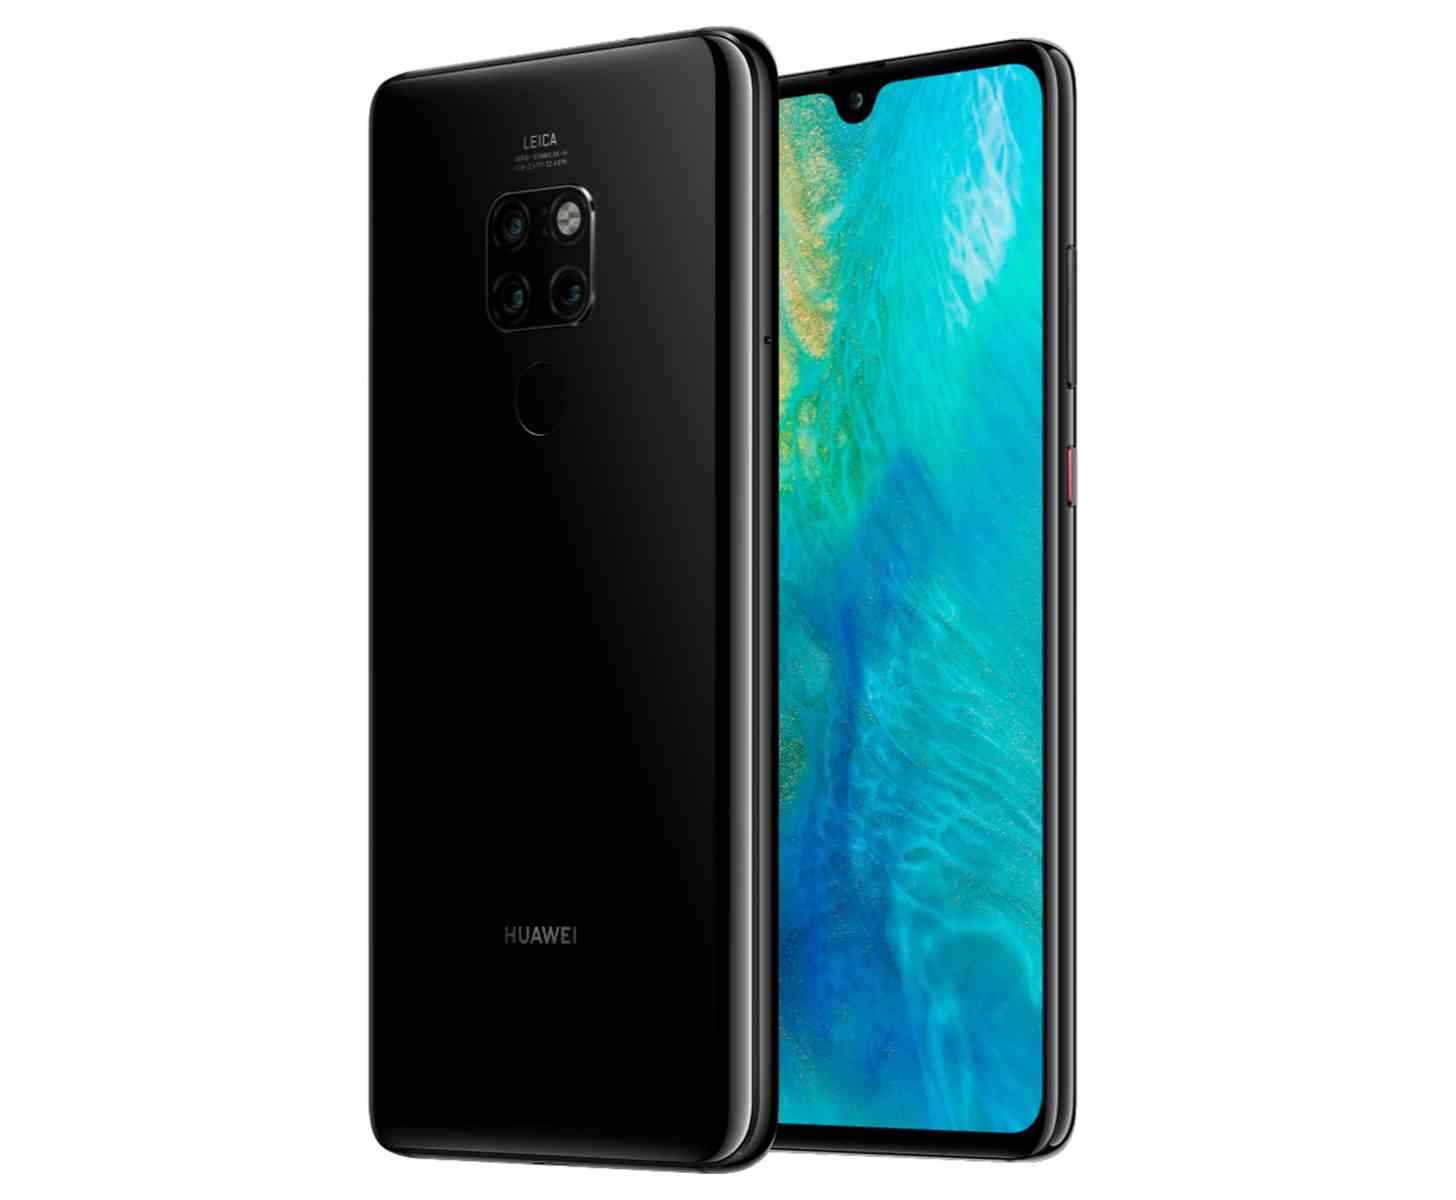 Huawei Mate 20 official